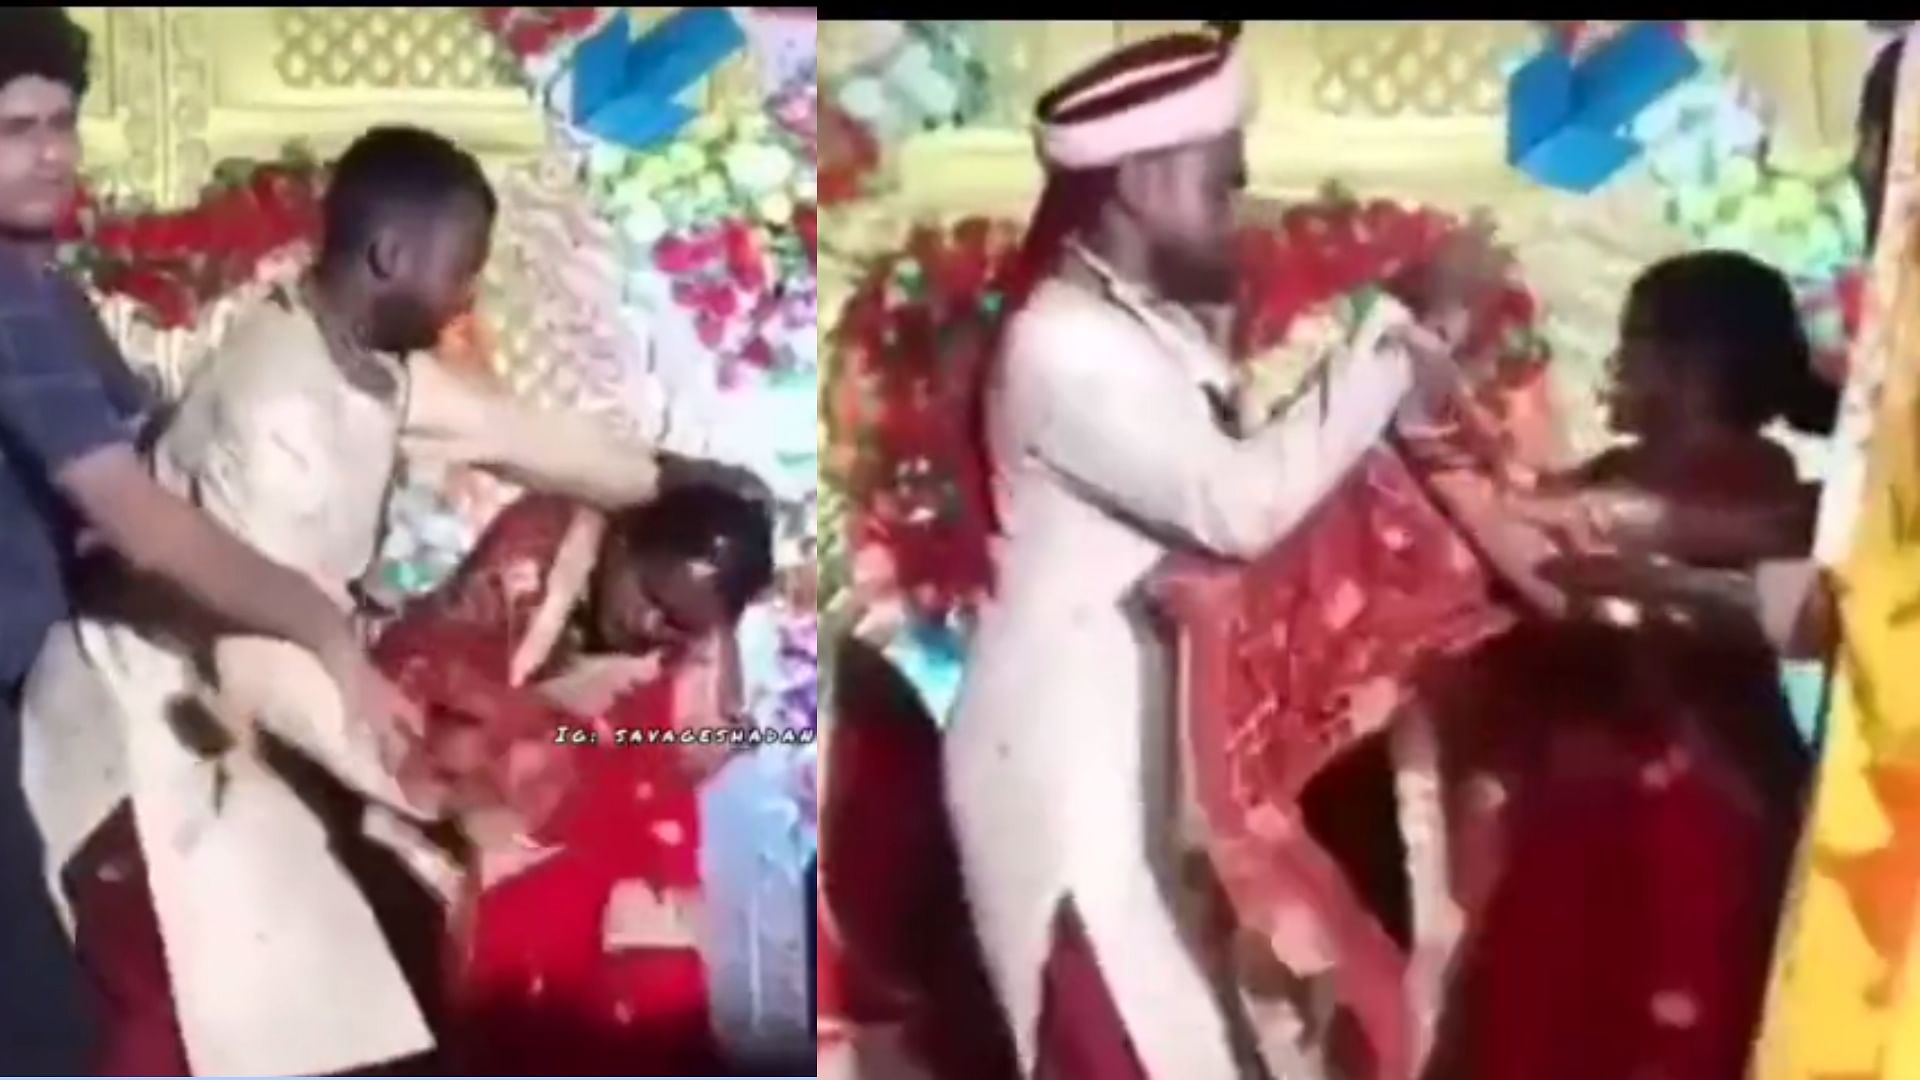 Wedding Video: Bride groom started fighting on the wedding stage video viral